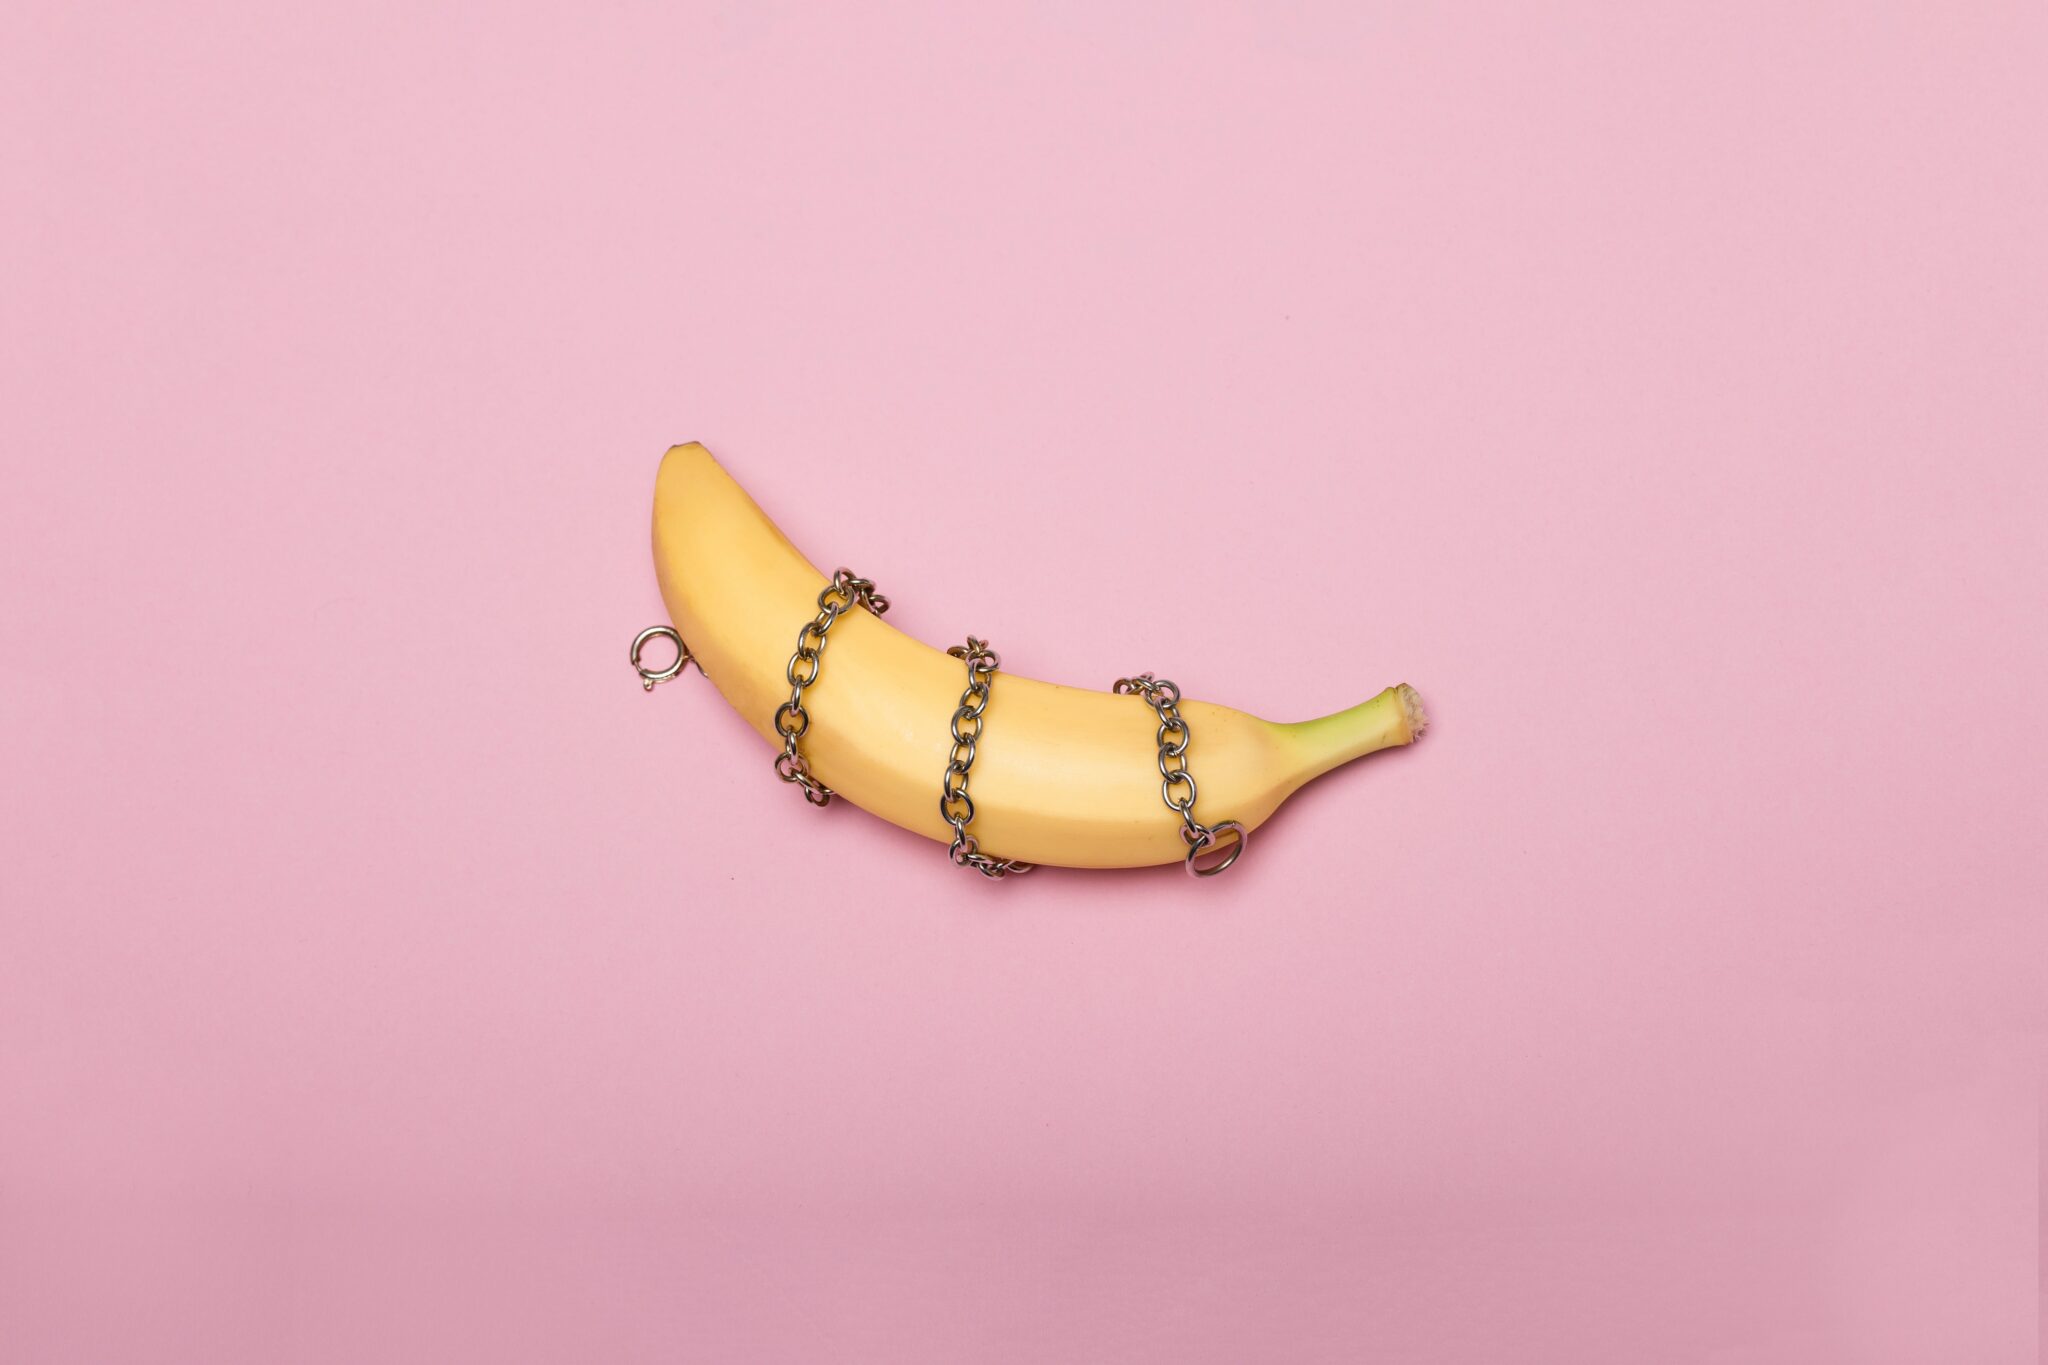 A banana wrapped in a chain over a pink background.